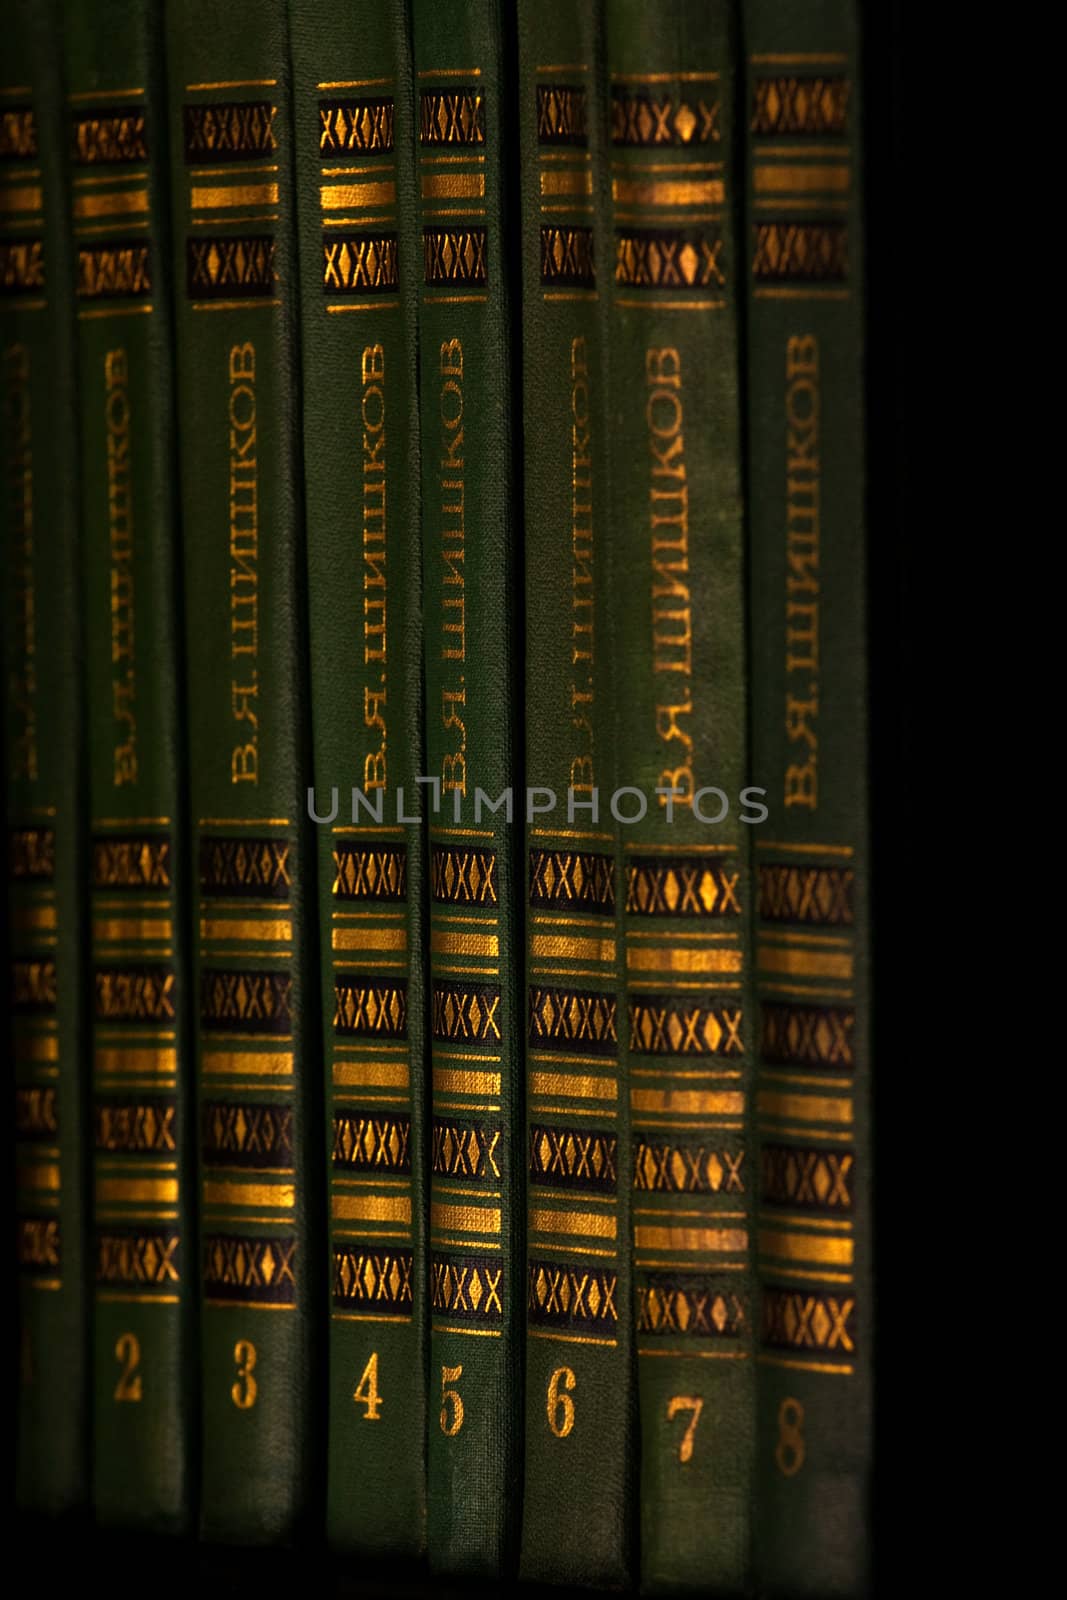 The green and gold book on the shelf by grigorenko